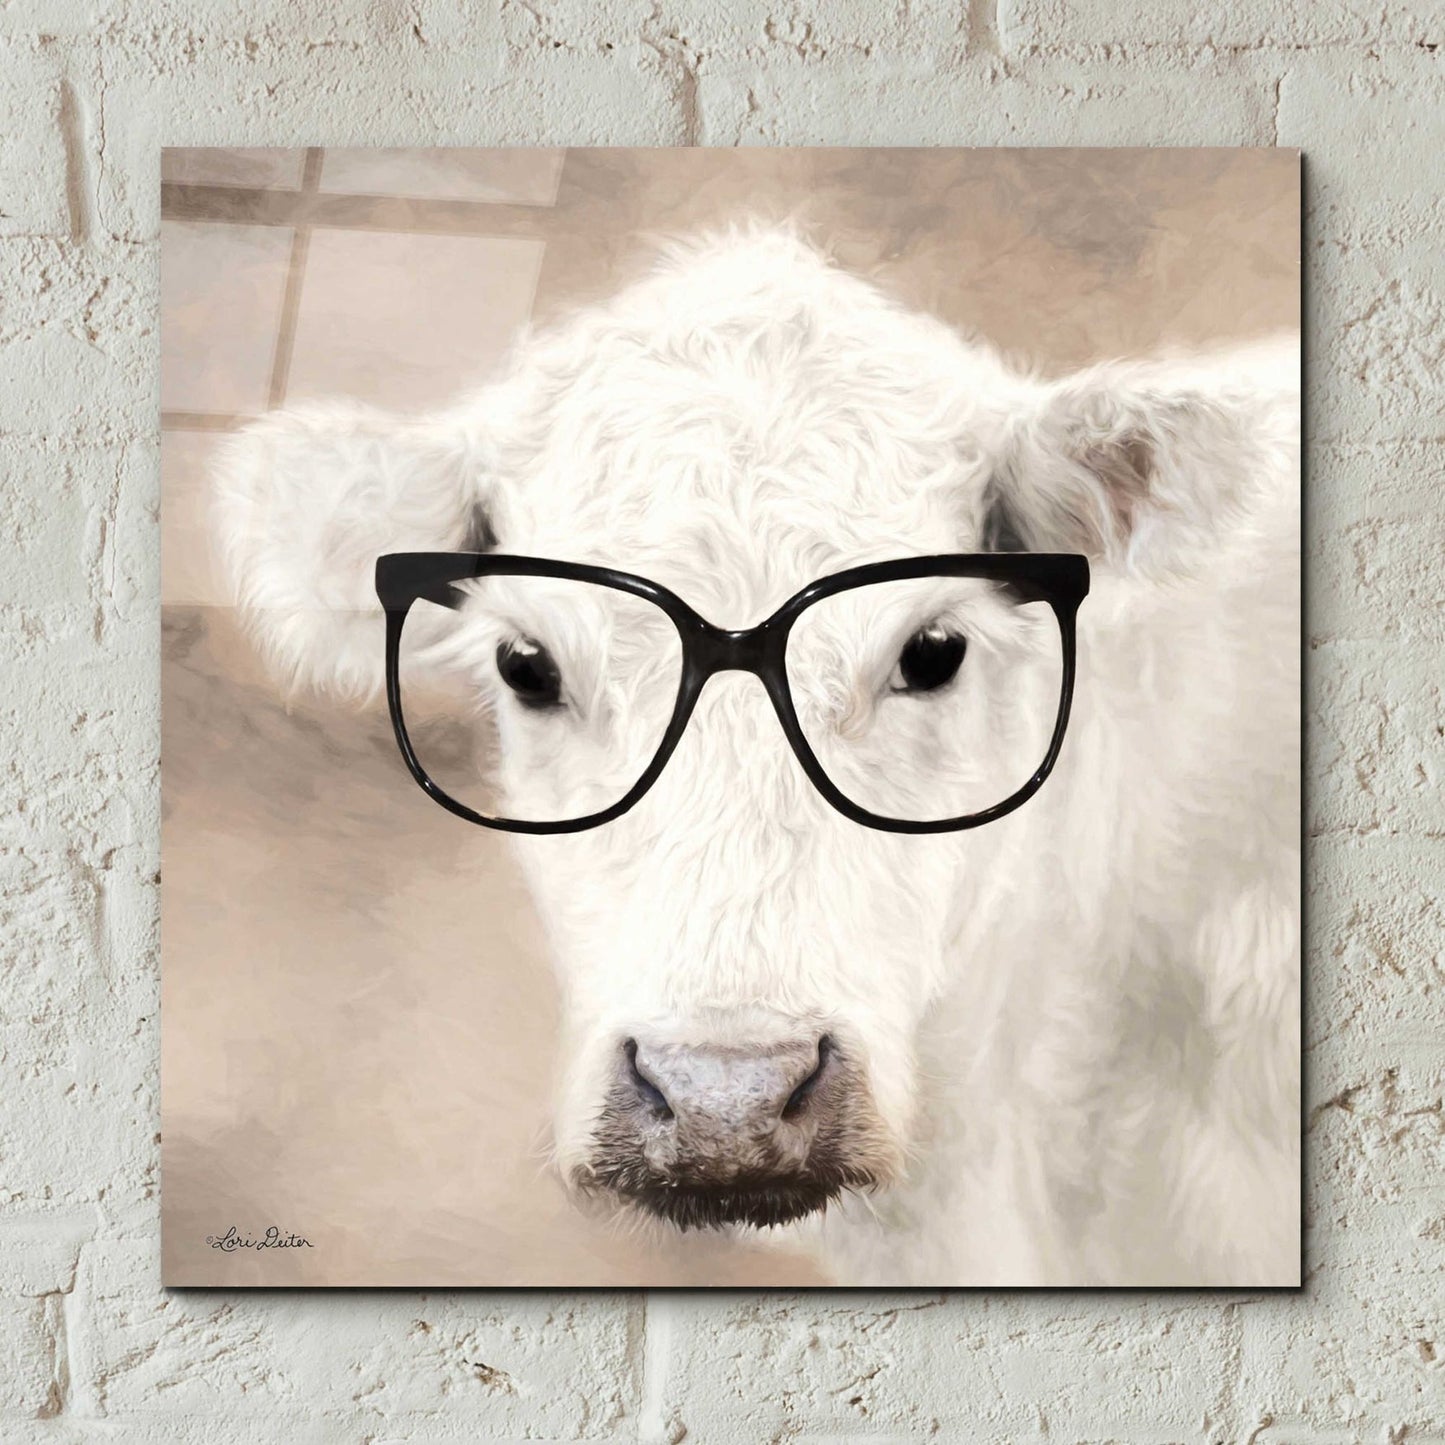 Epic Art 'See Clearly Cow' by Lori Deiter, Acrylic Glass Wall Art,12x12